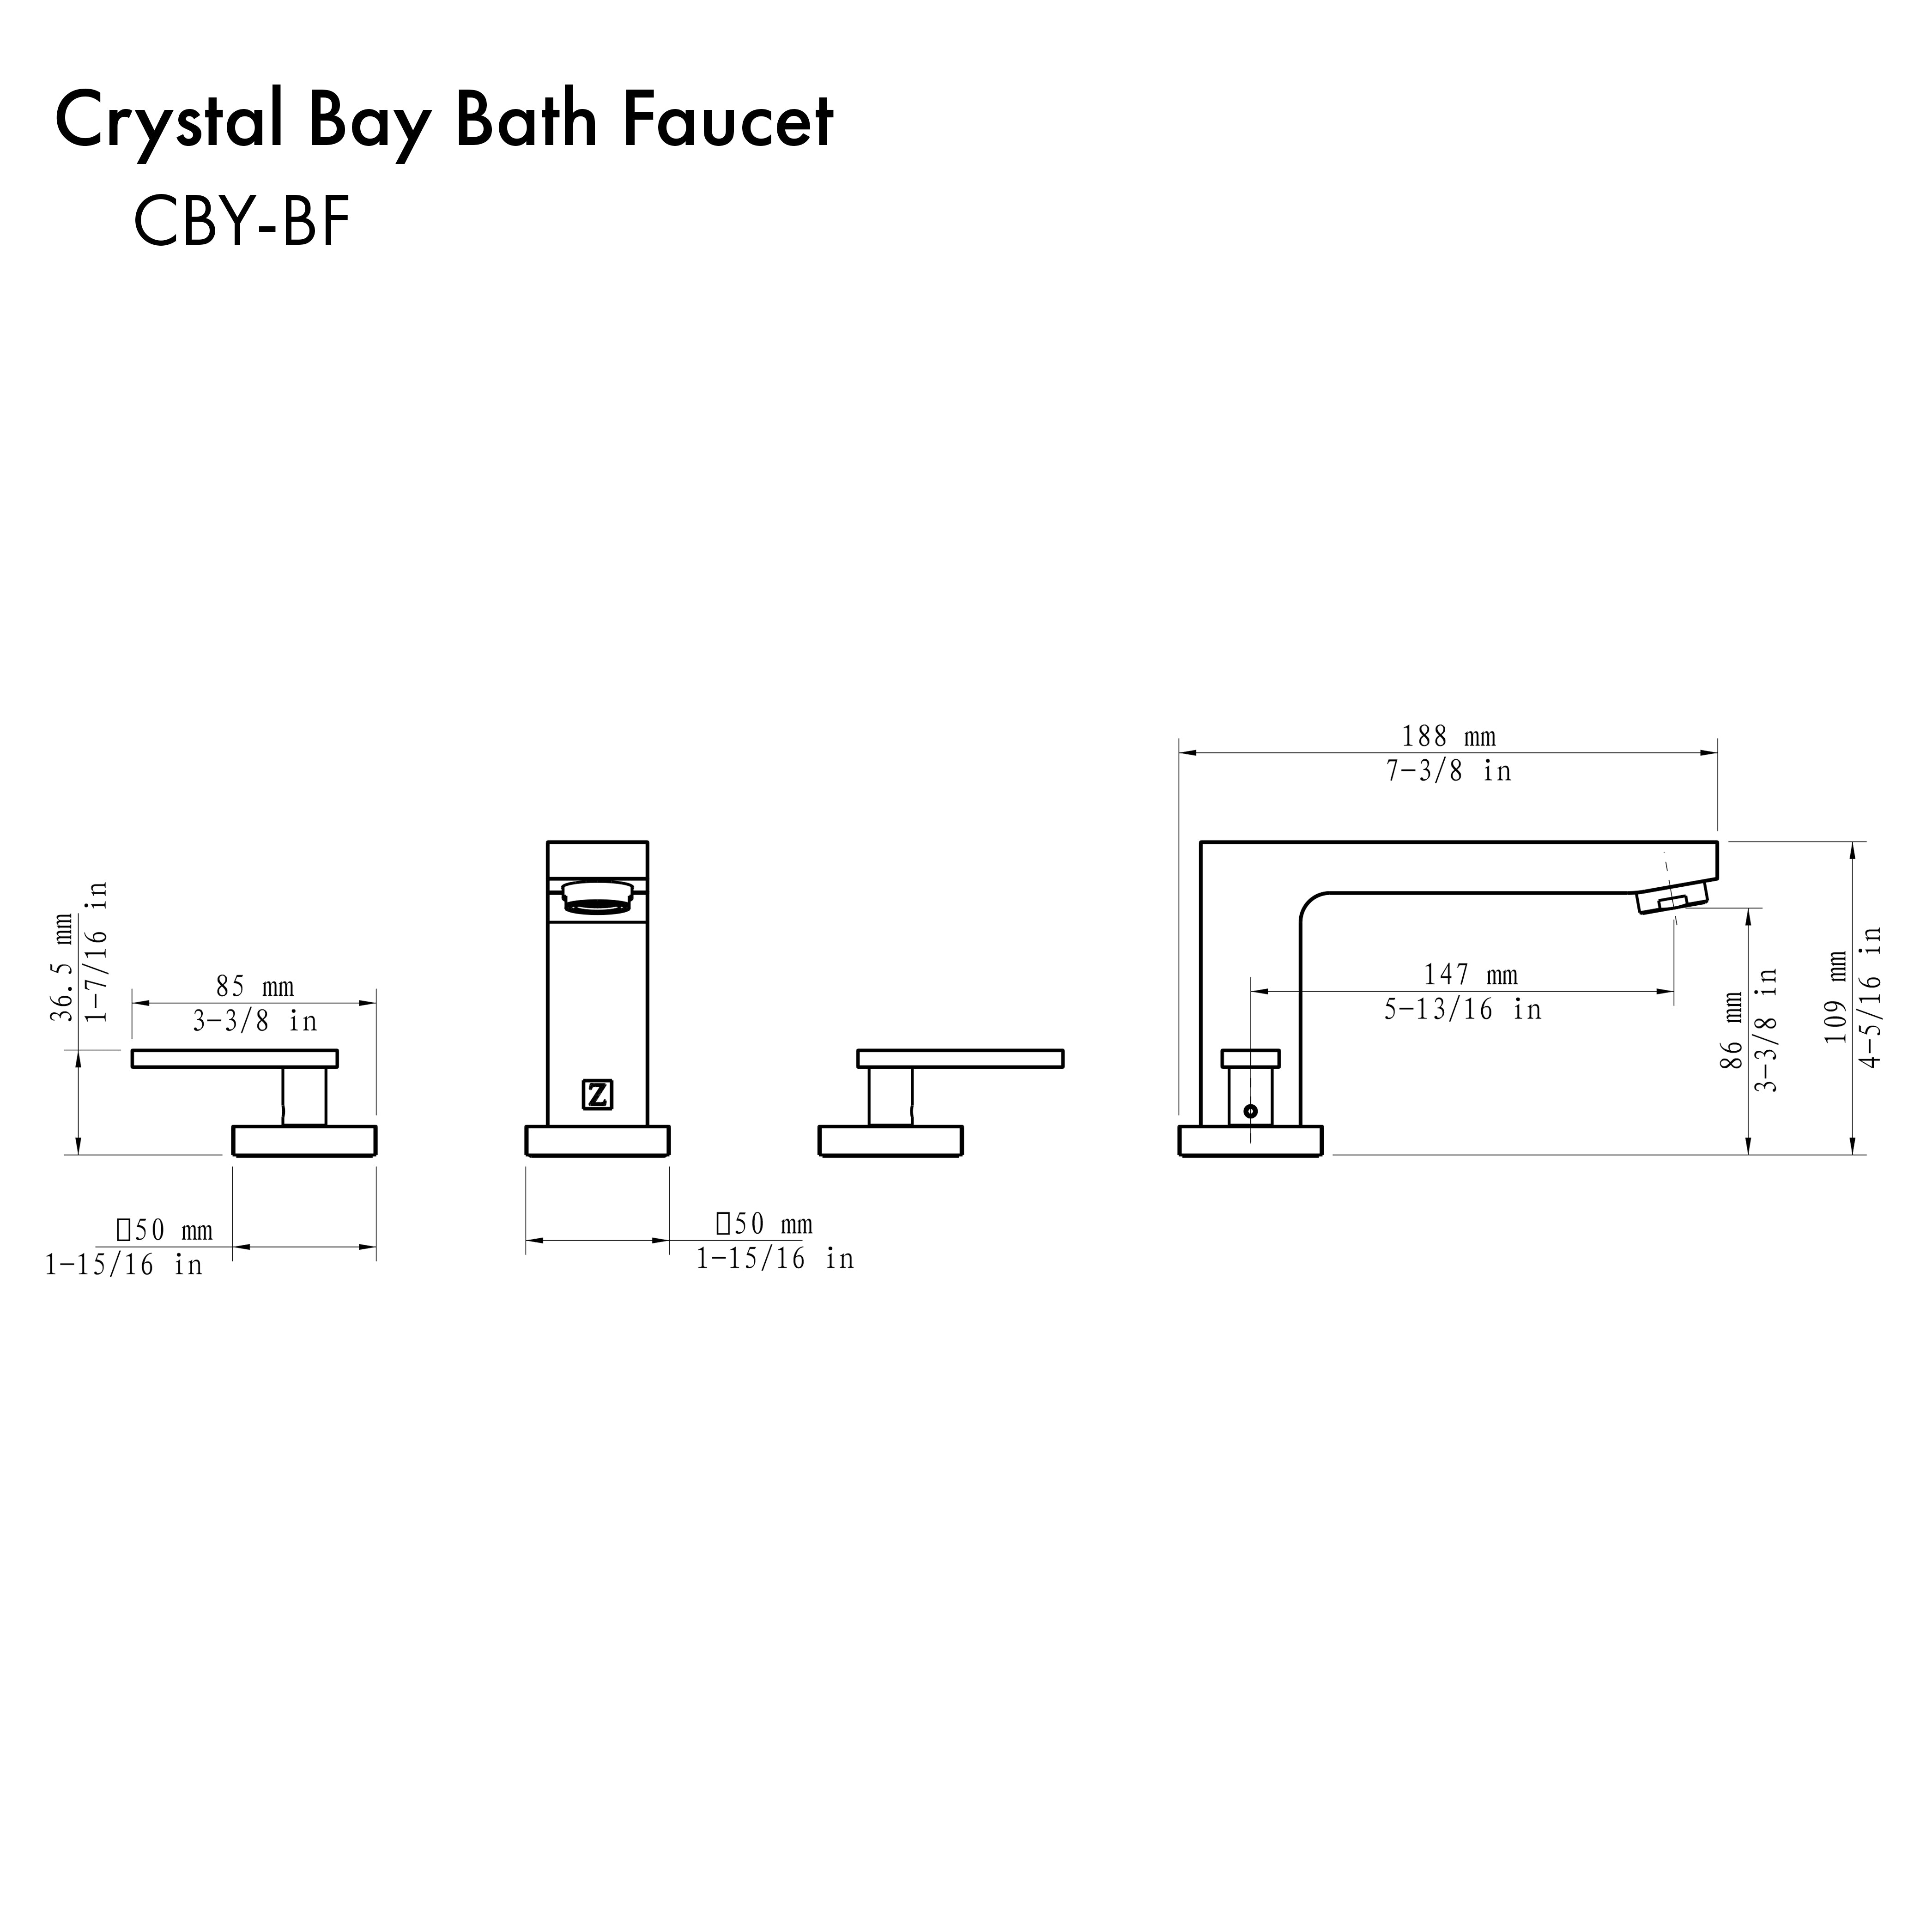 ZLINE Crystal Bay Bath Faucet with Color Options (CBY-BF-PG)